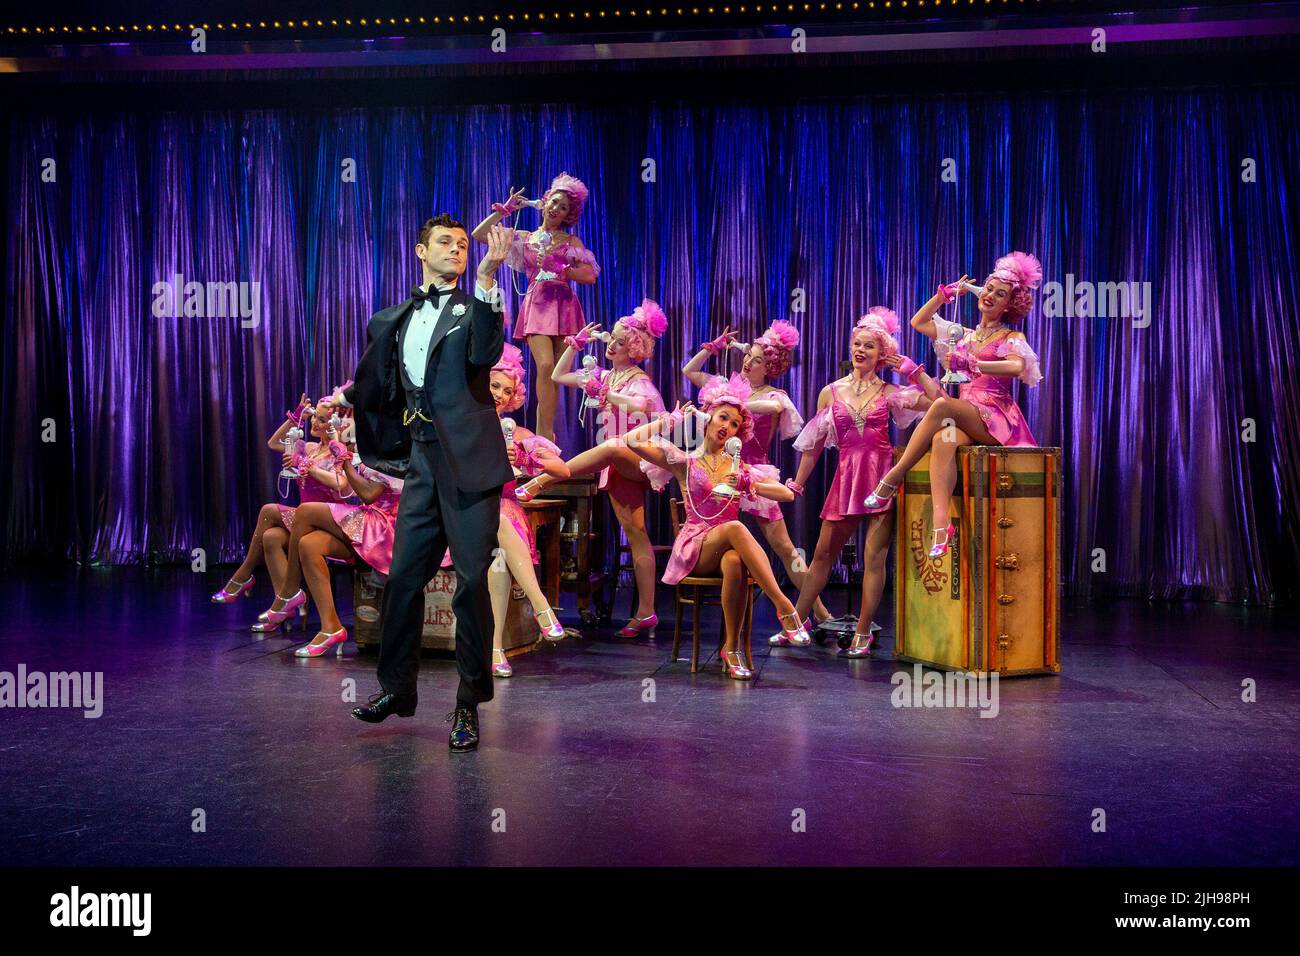 Charlie Stemp (Bobby Child) with the Zangler Follies girls in CRAZY FOR YOU at the Chichester Festival Theatre, Chichester, West Sussex, England  opening on 19/07/2022 music & lyrics: George & Ira Gershwin  book: Ken Ludwig  co-conceived by Ken Ludwig & Mike Ockrent  set design: Beowulf Boritt  costumes: William Ivey Long  lighting: Ken Billington  choreography & direction: Susan Stroman Stock Photo